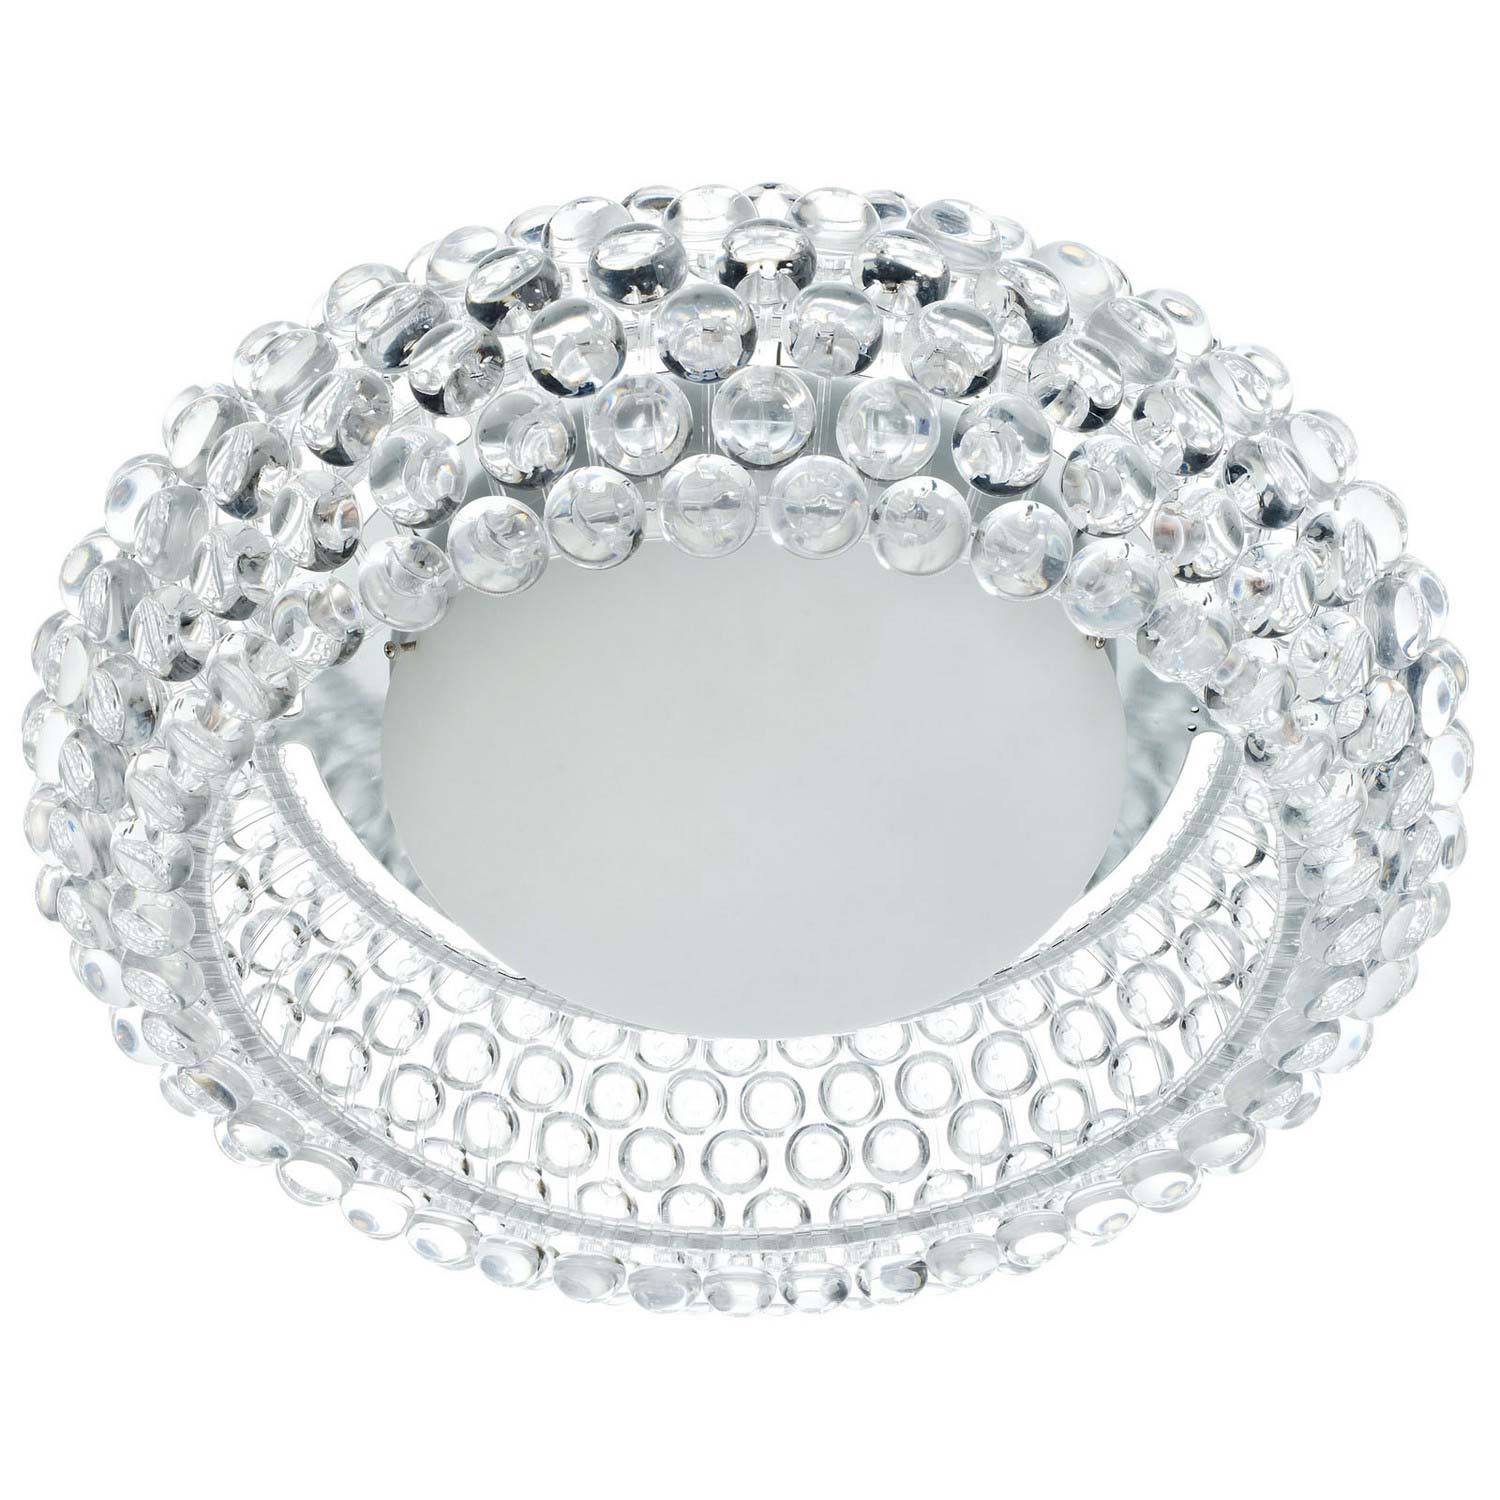 Modway Halo 26 Ceiling Fixture - Clear